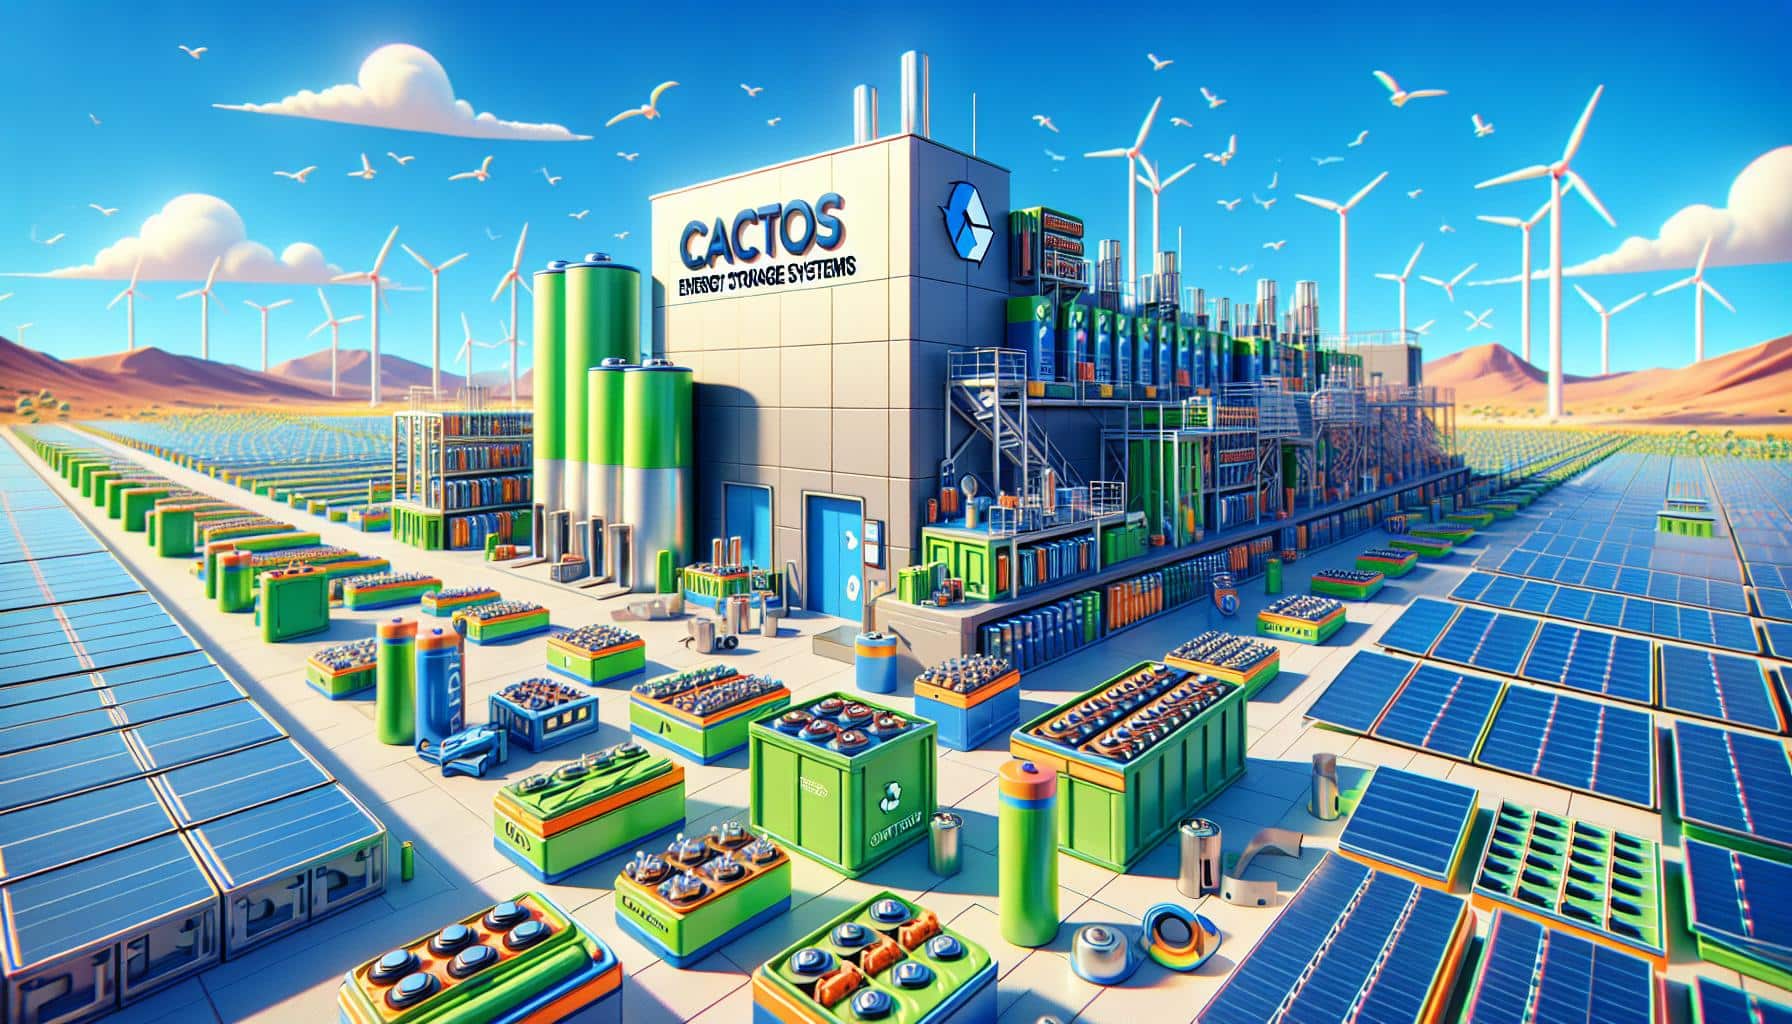 "Cactos Raises .5M to Build Energy Storage Systems with Old Tesla Batteries" | FinOracle